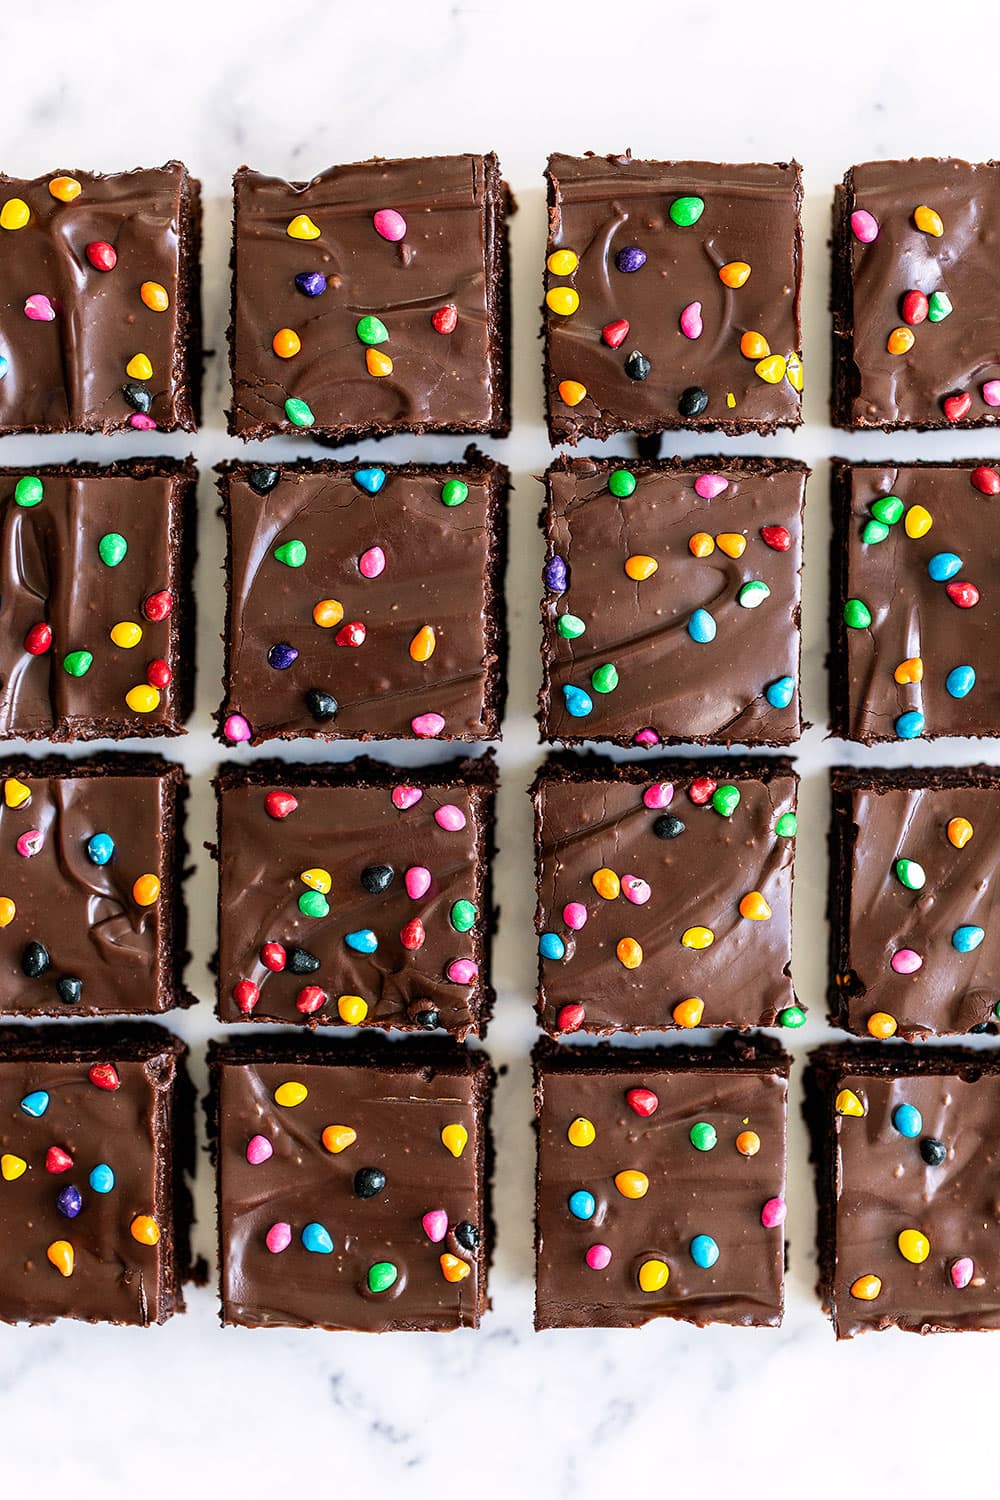 Overhead look of all the cosmic brownies cut into squares